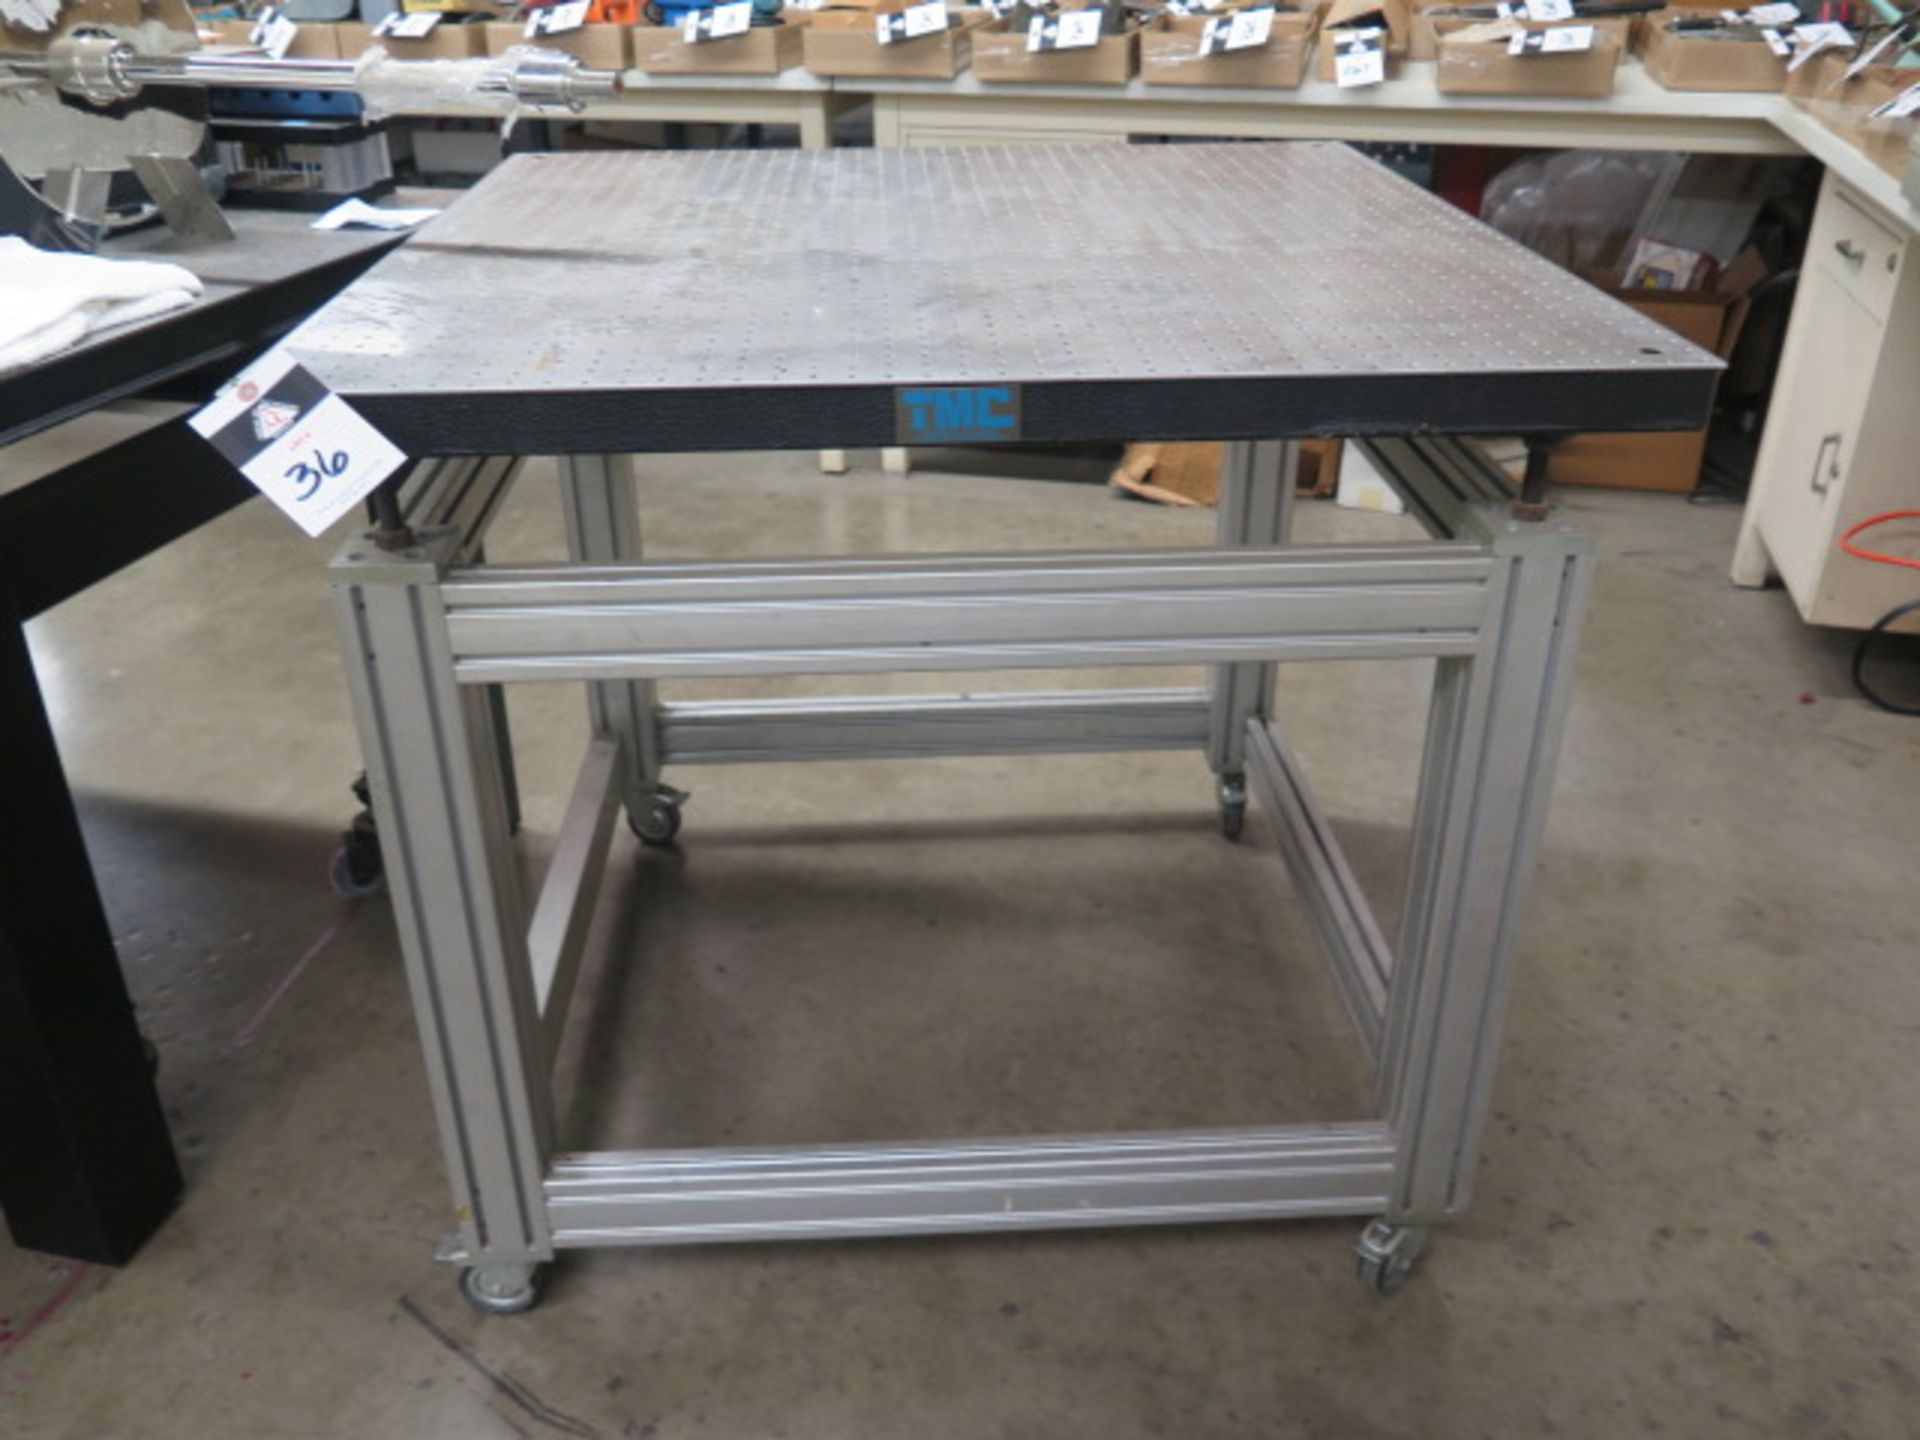 TMC 39” x 39” Honeycomb Technical Lab Test Table w/ Wheels (SOLD AS-IS - NO WARRANTY)